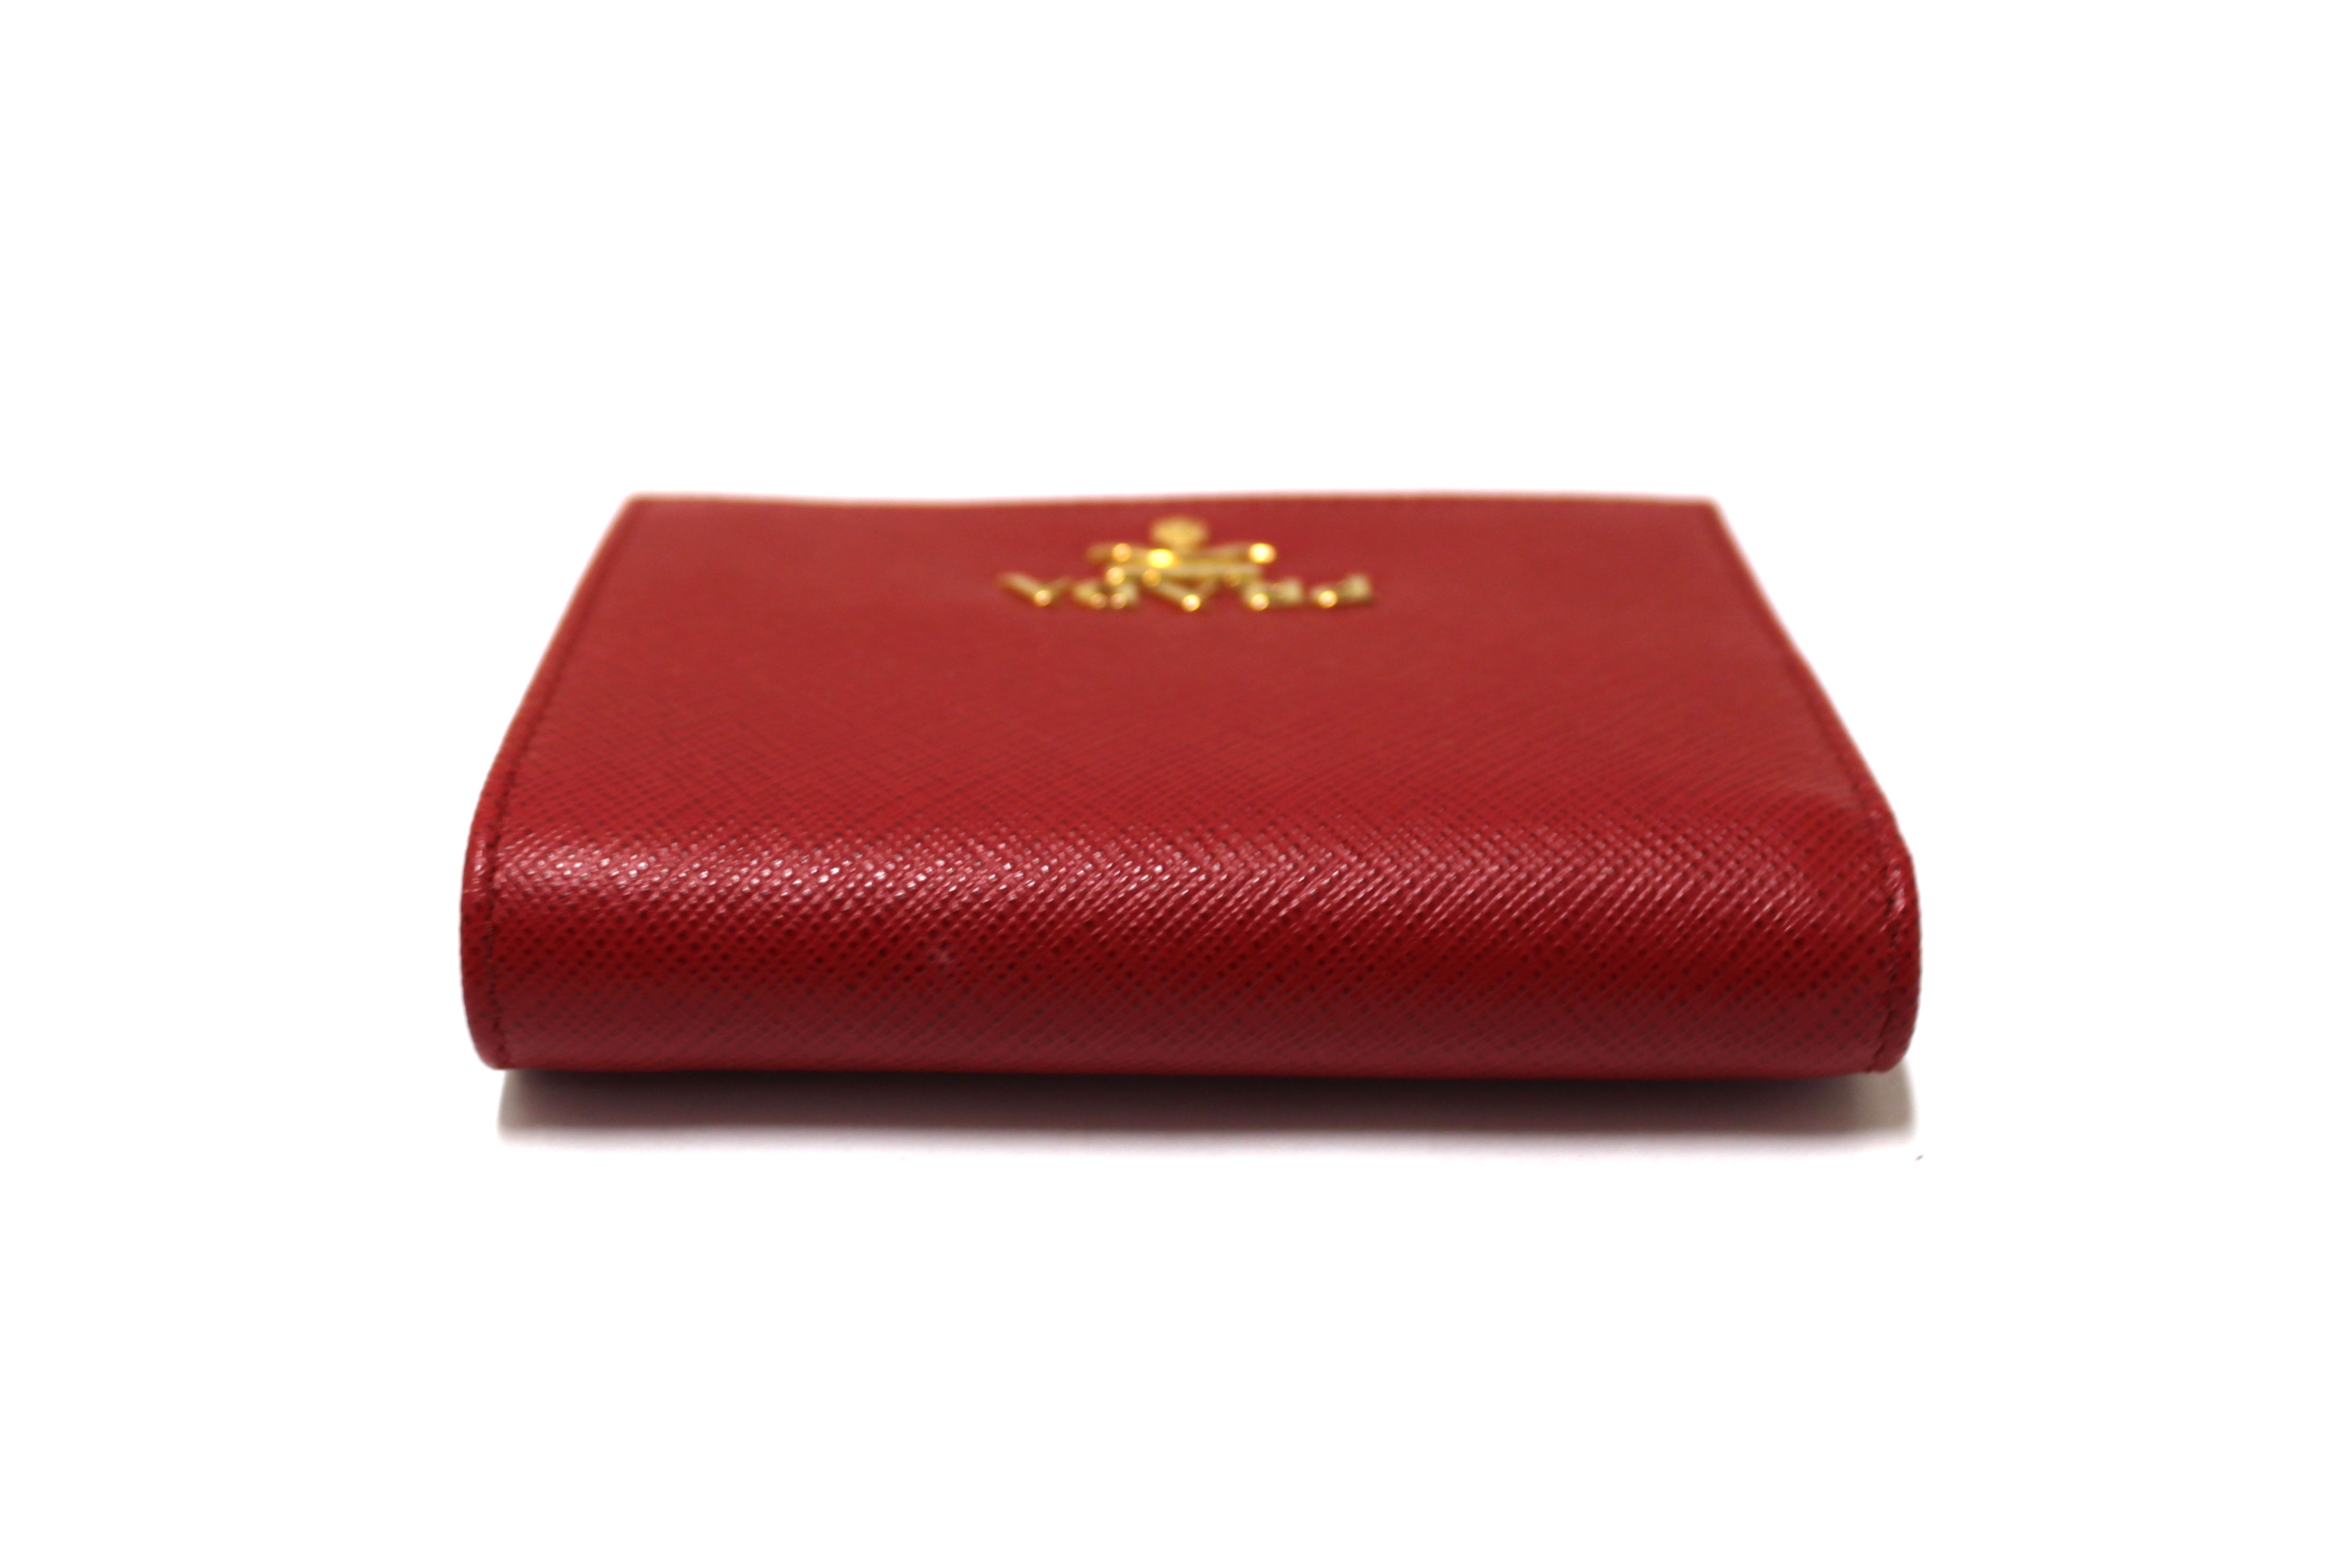 NEW Authentic Prada Red Saffiano Leather Small Bi-fold Wallet